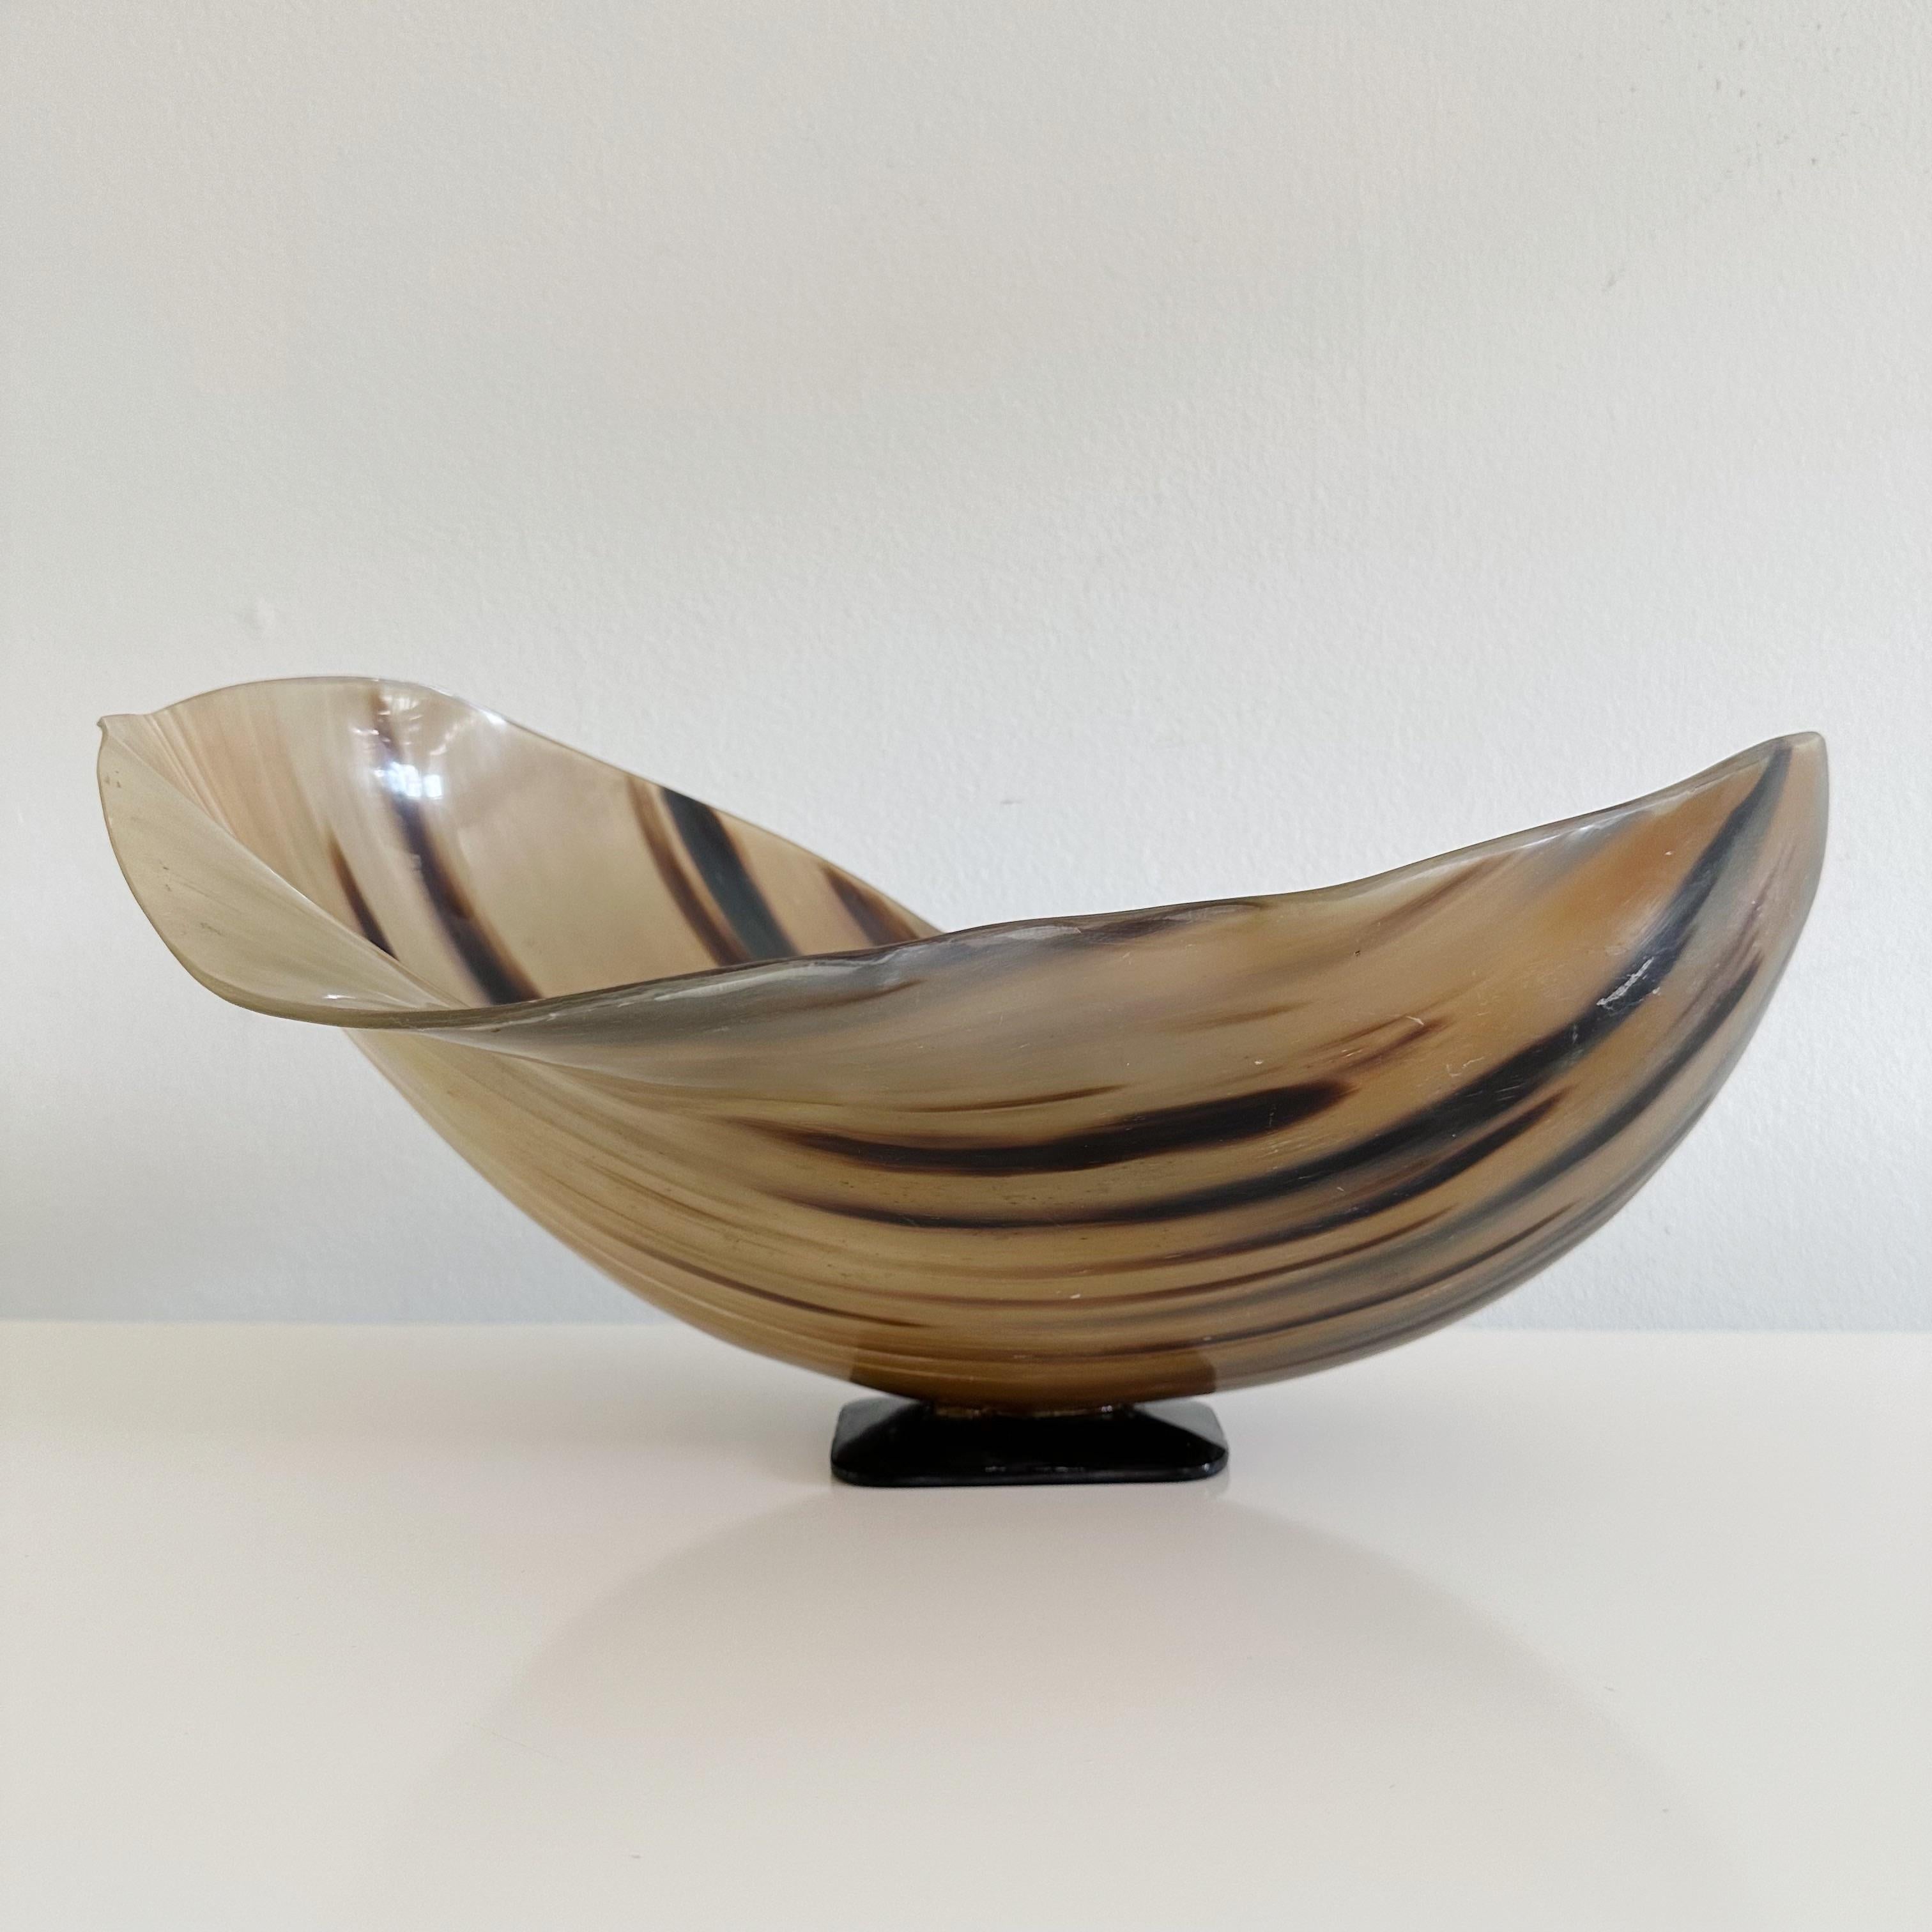 Handcrafted Horn Centerpiece Bowl, a Remarkable Oversized Decor Piece from the 1980s